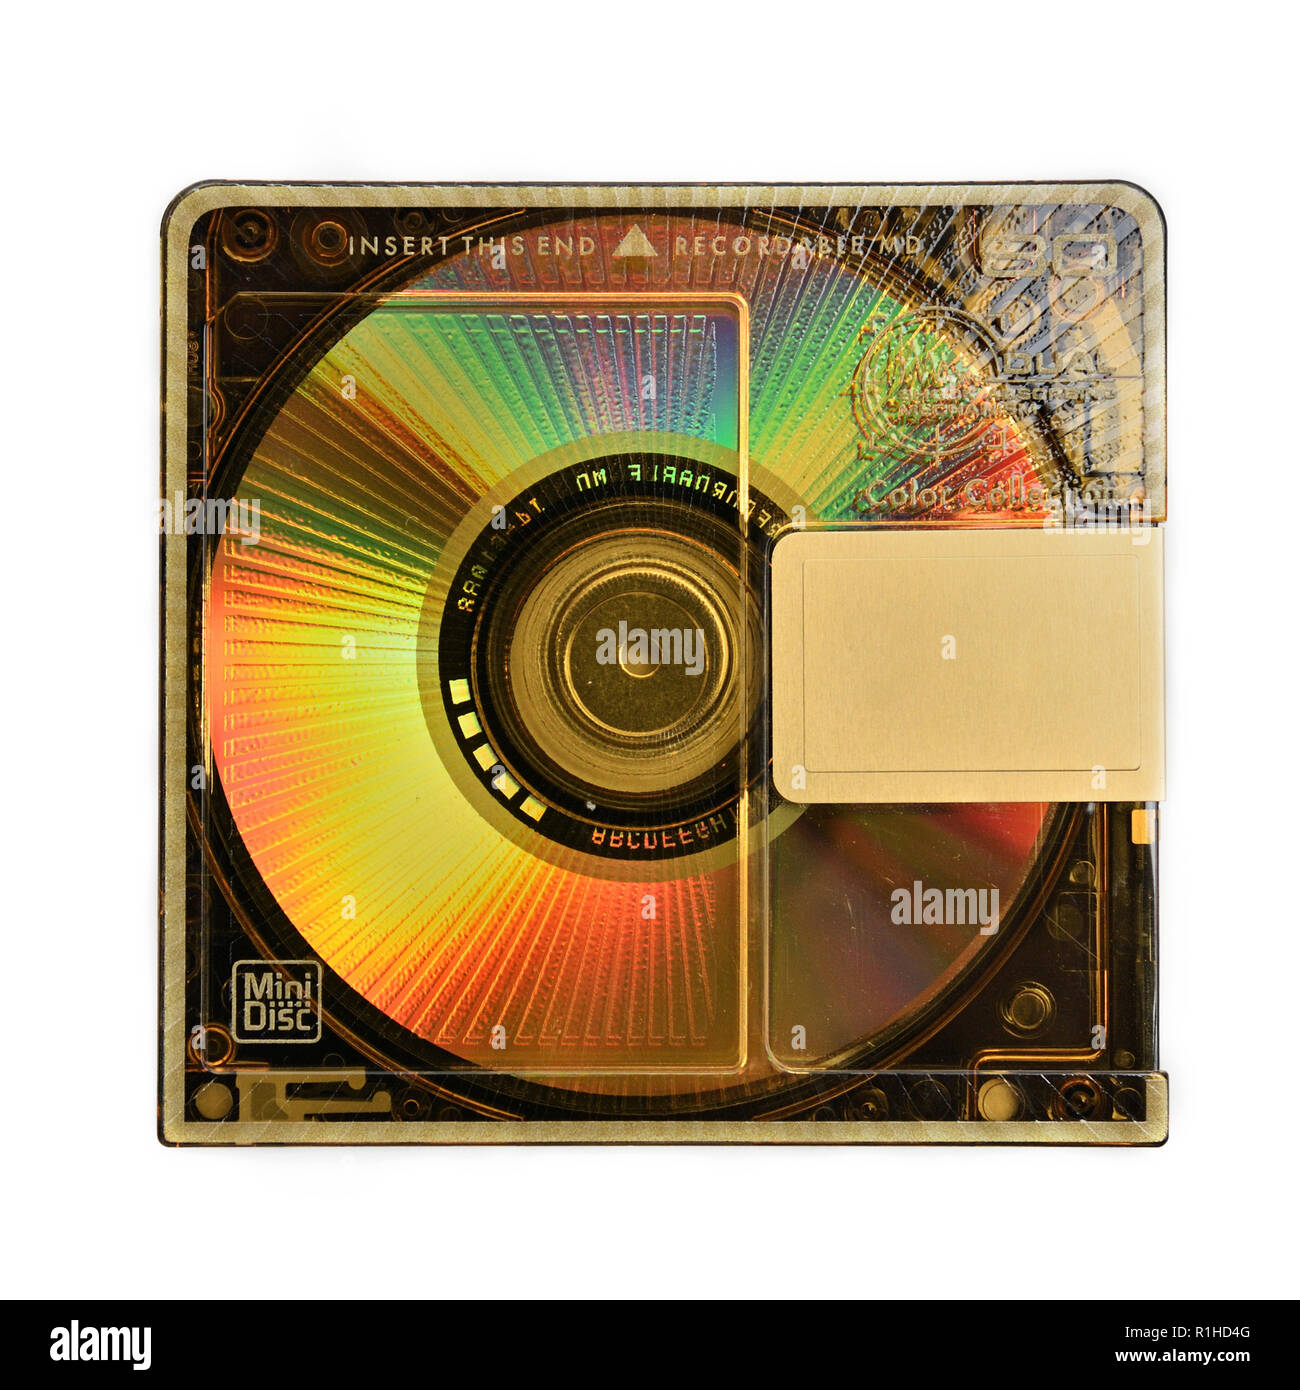 Compact rewritable Mini Disc- MD for digital recording released in the 90s  on an isolated white background Stock Photo - Alamy